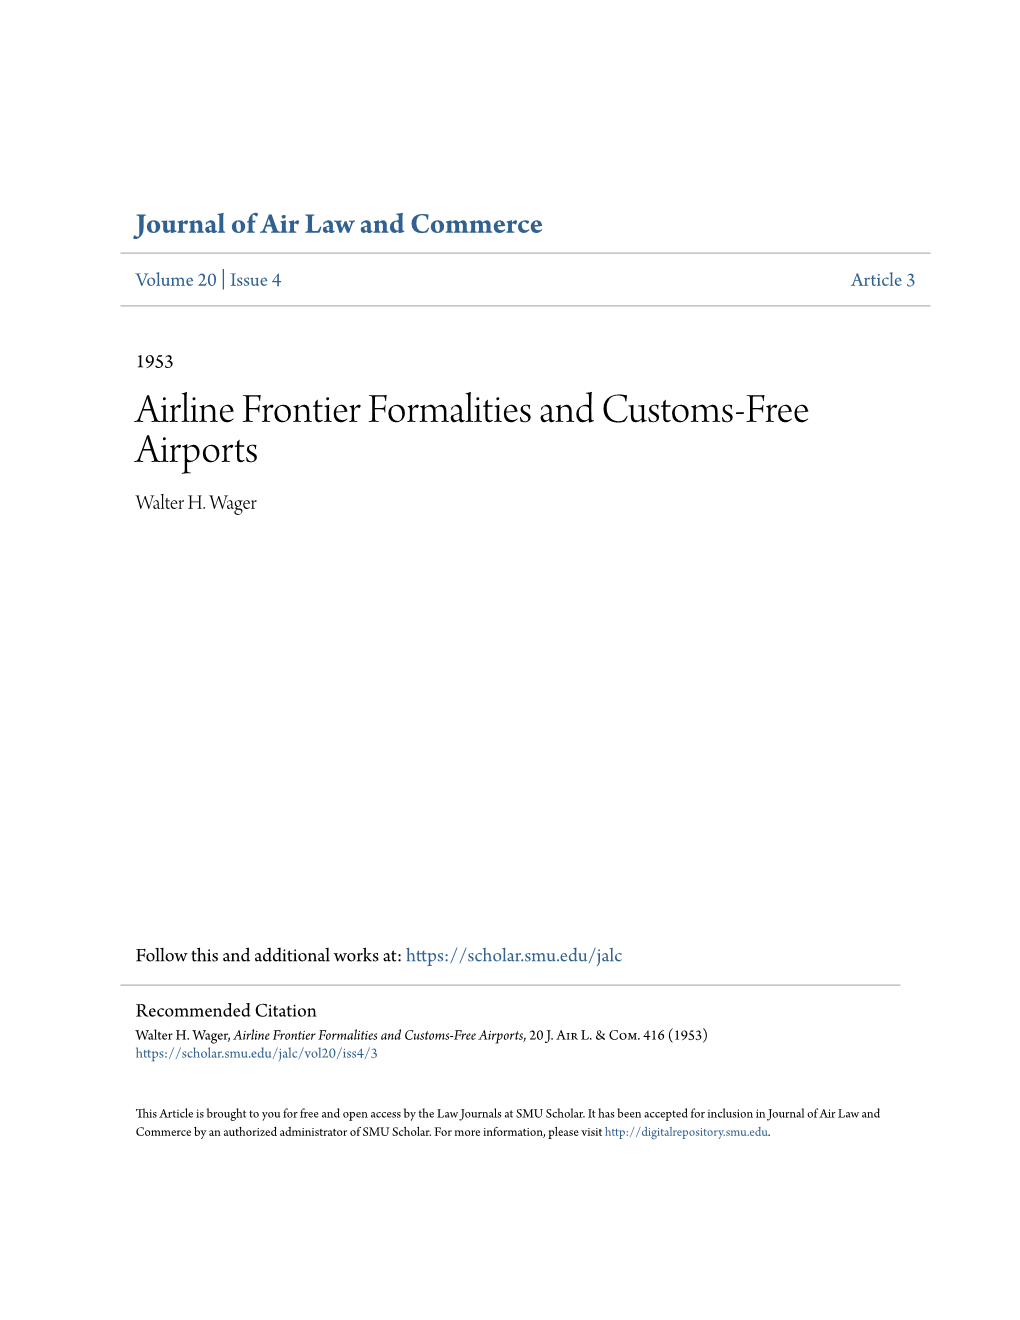 Airline Frontier Formalities and Customs-Free Airports Walter H